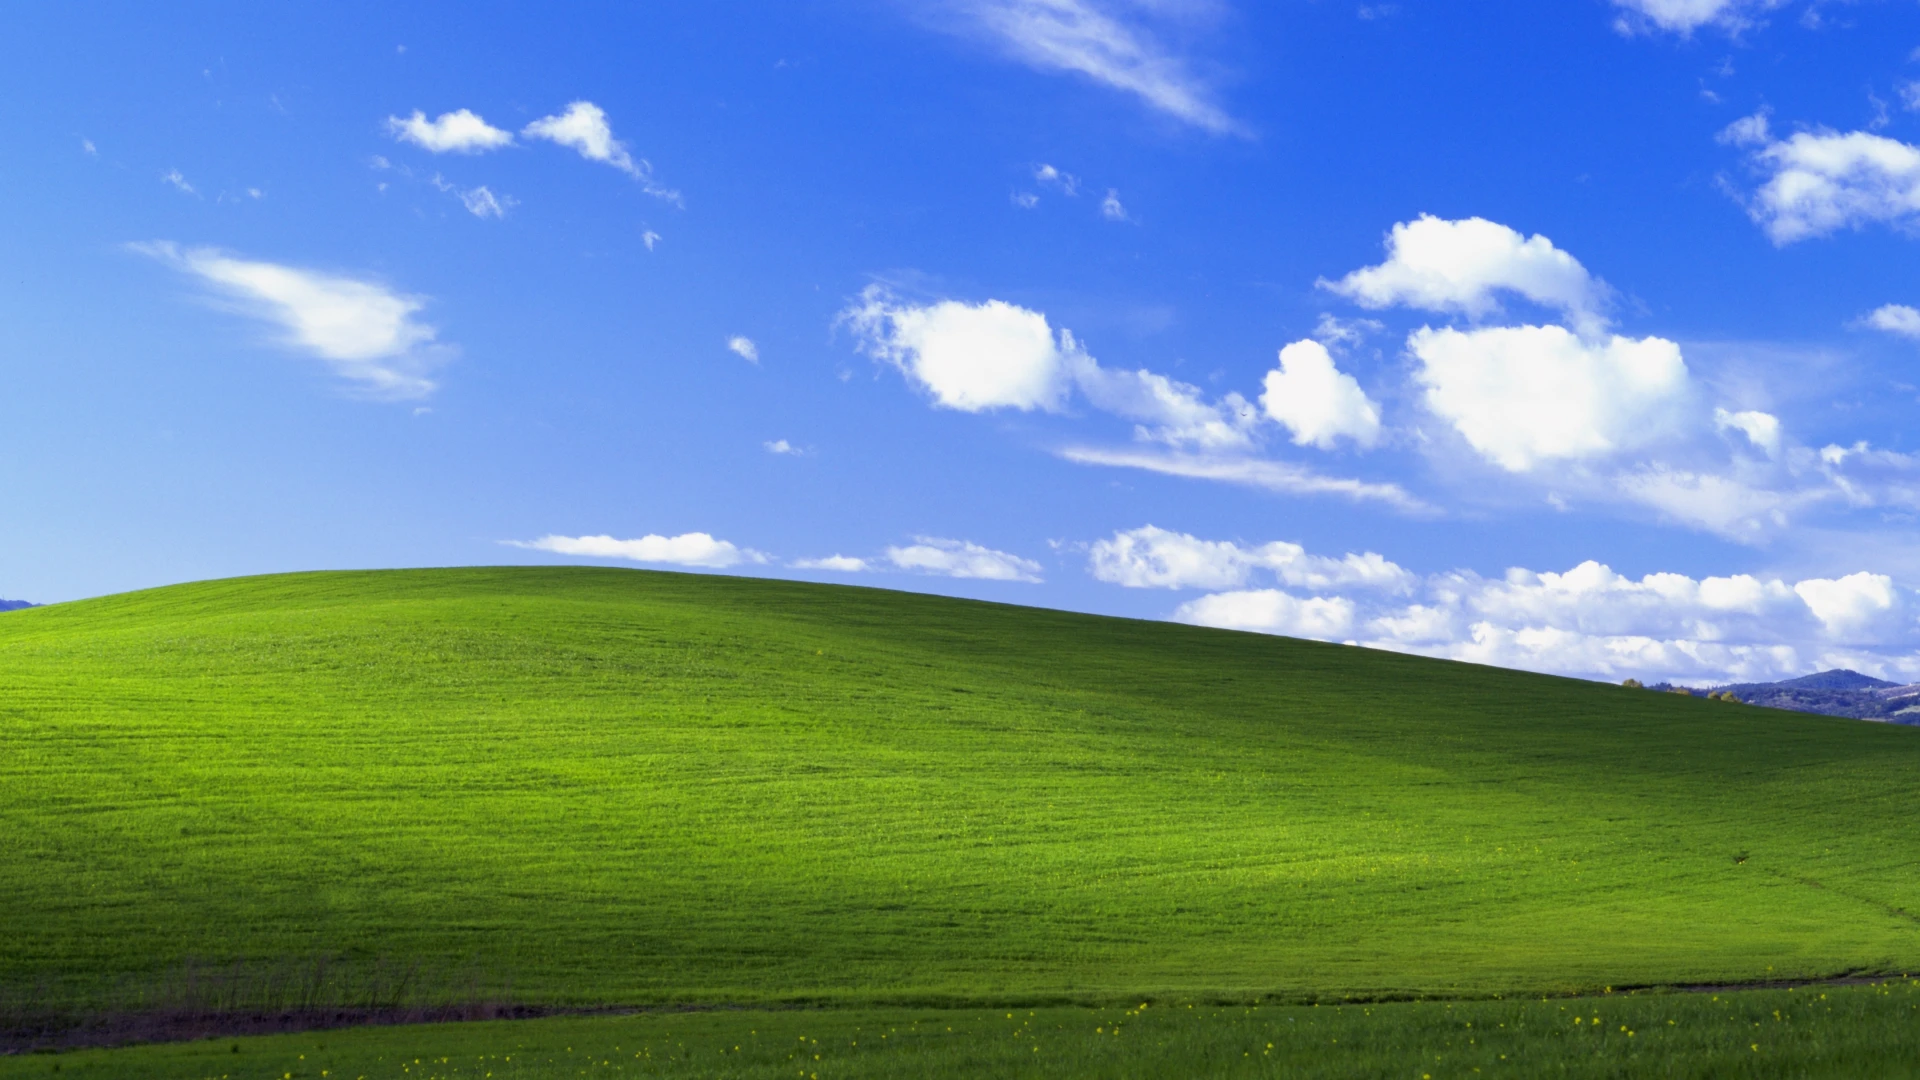 Windows XP’s iconic ‘Bliss’ wallpaper was clicked on a road trip. What Microsoft paid for it